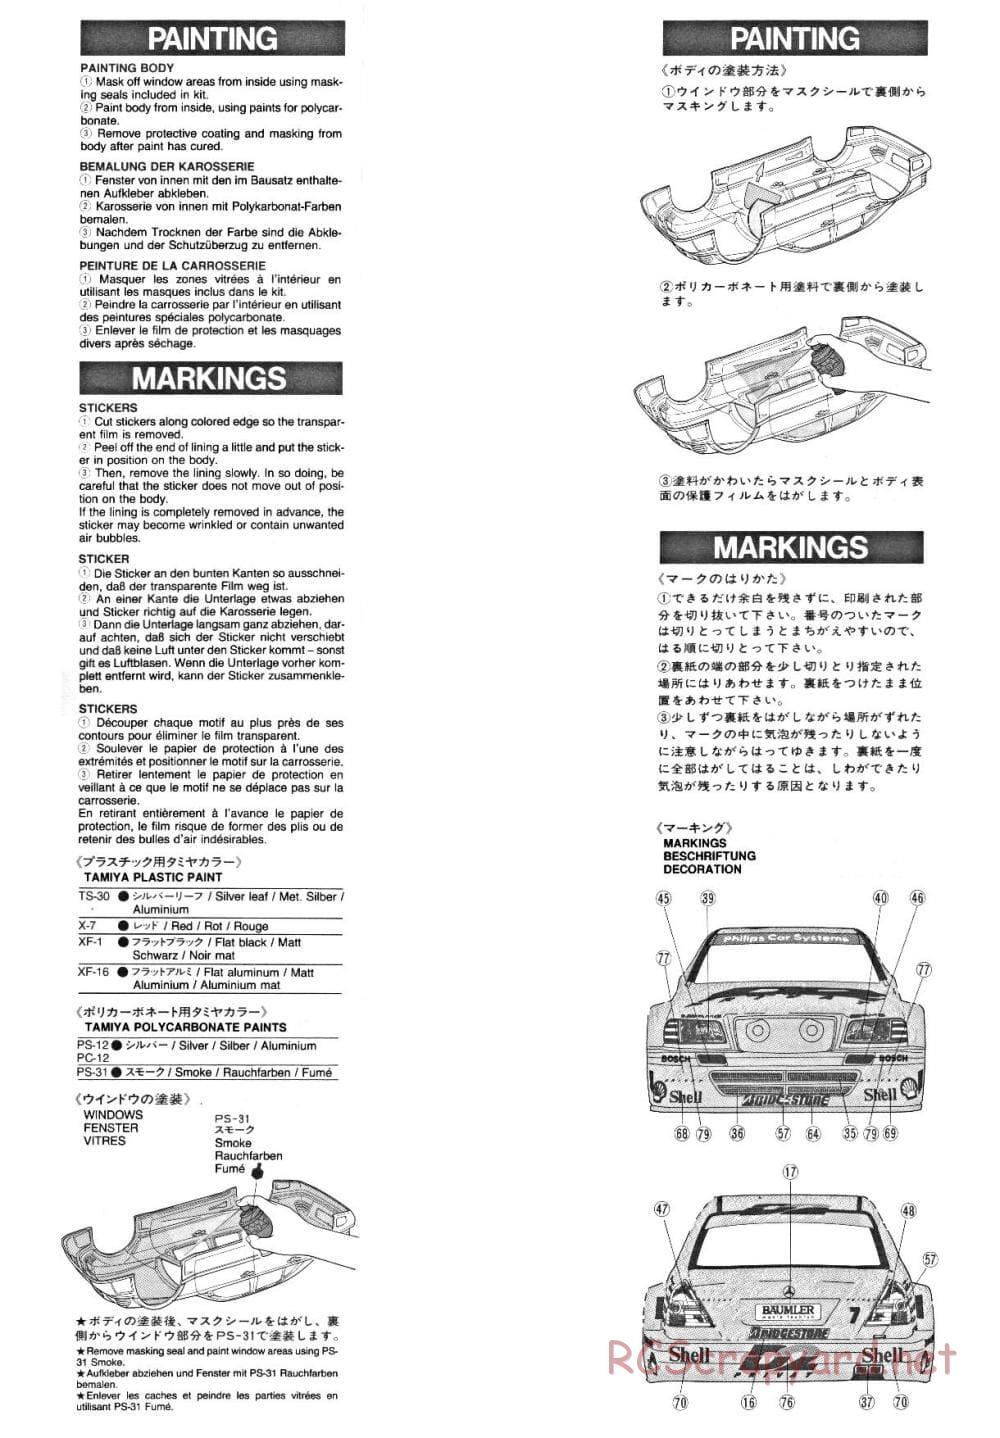 Tamiya - AMG Mercedes-Benz C-Class DTM D2 - TA-02 Chassis - Manual - Page 17